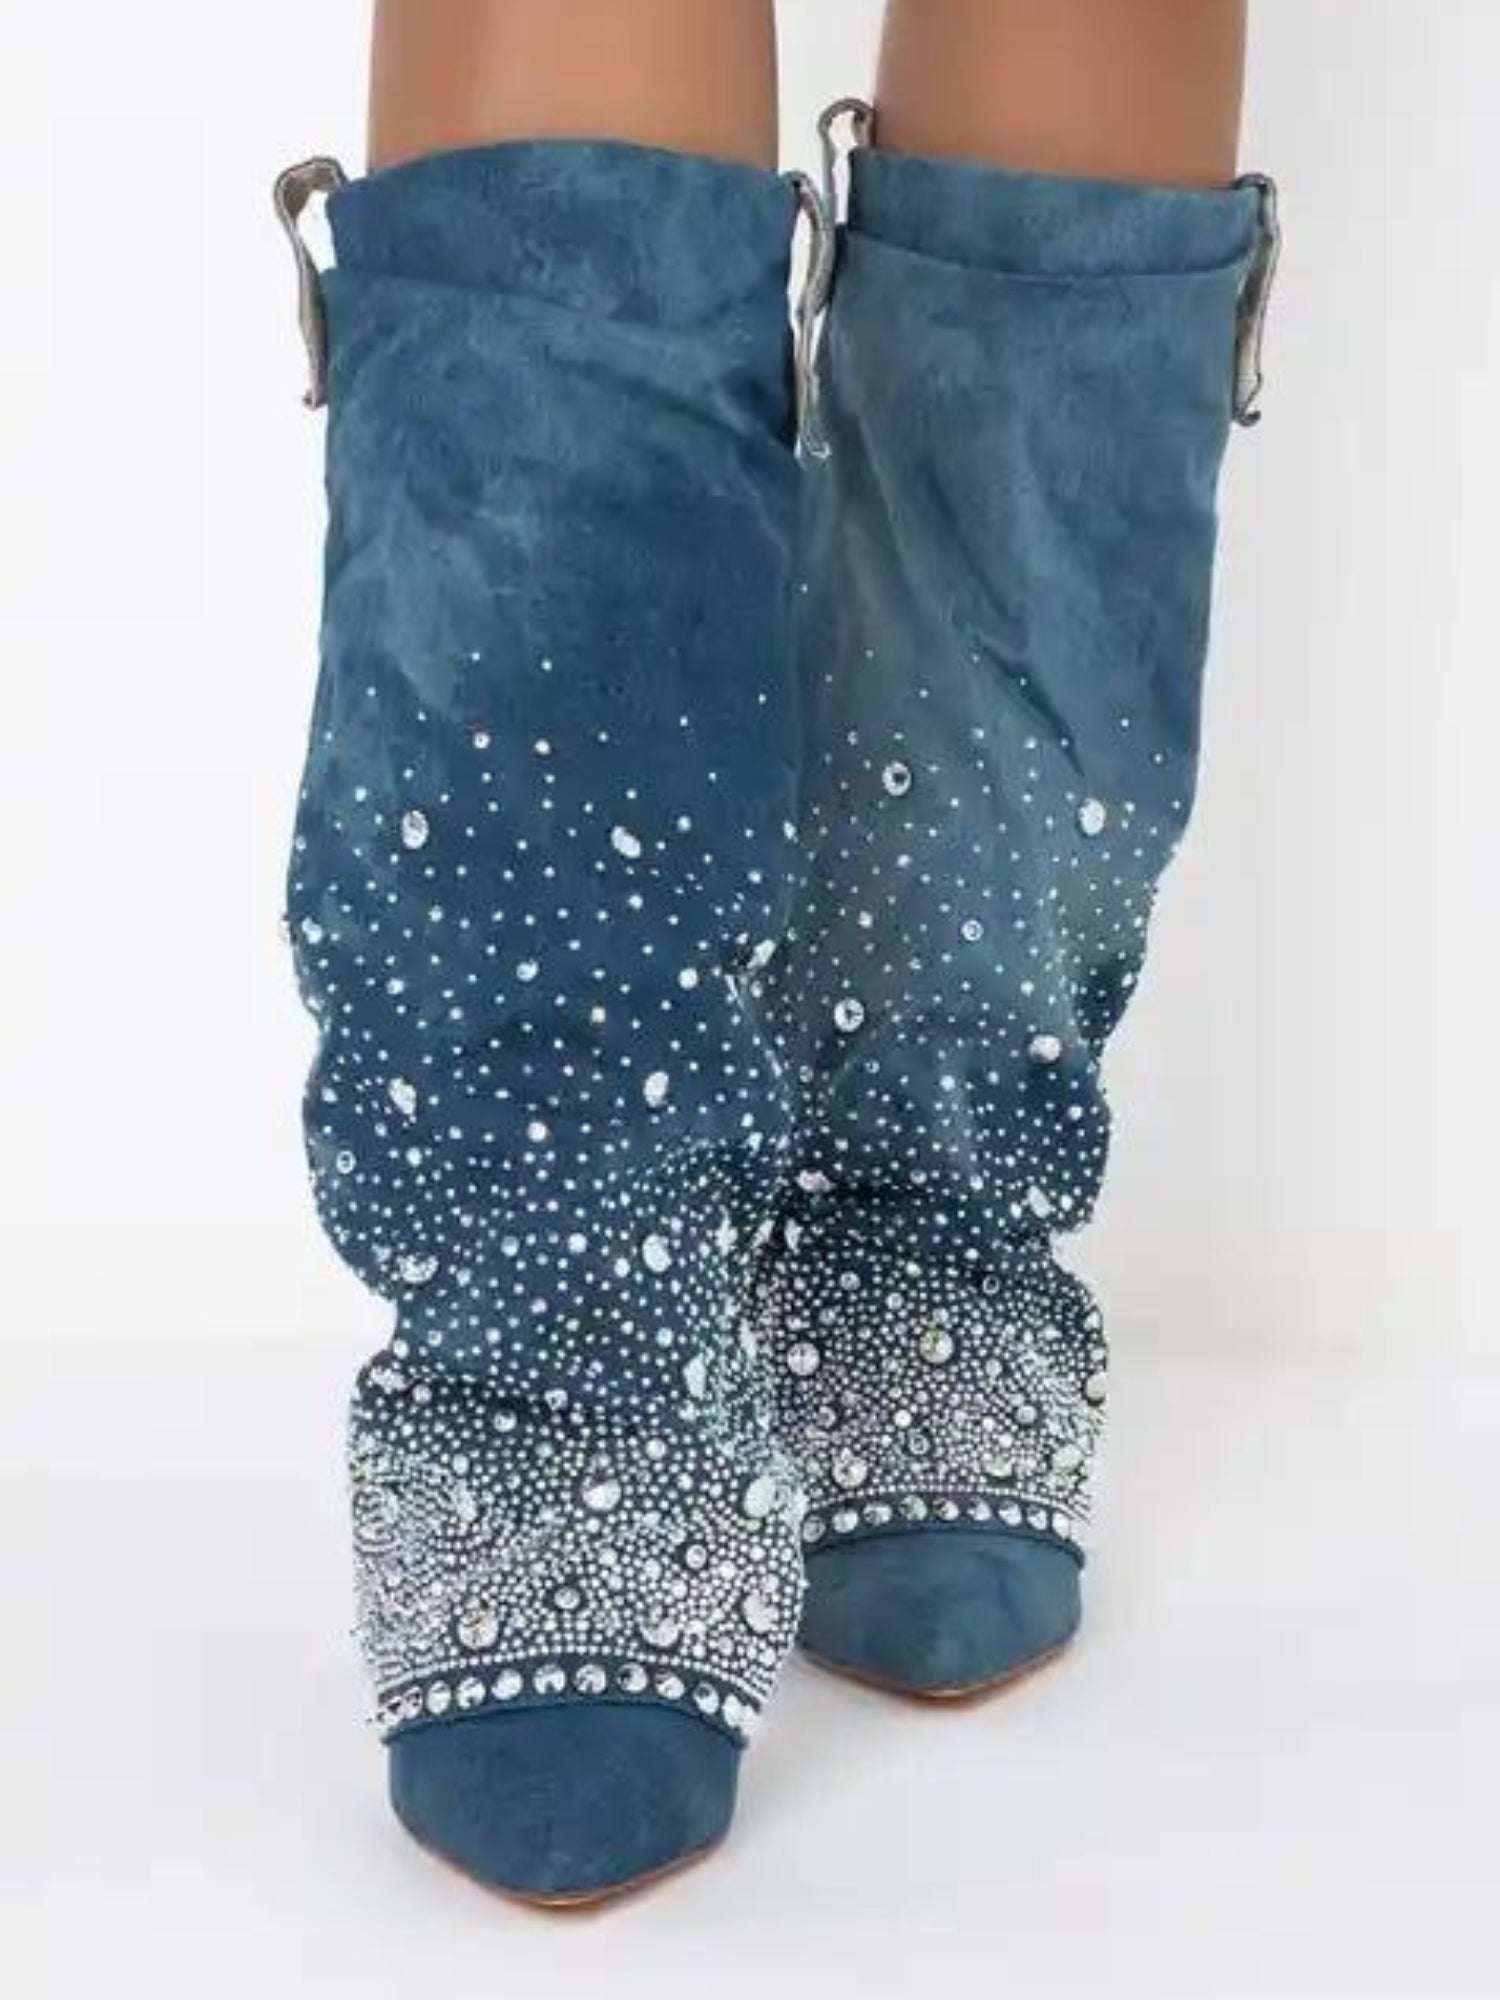 The Allo Bedazzled Denim Boots, Shoes, Azalea Wang - Ivory Sheep Collection Limited